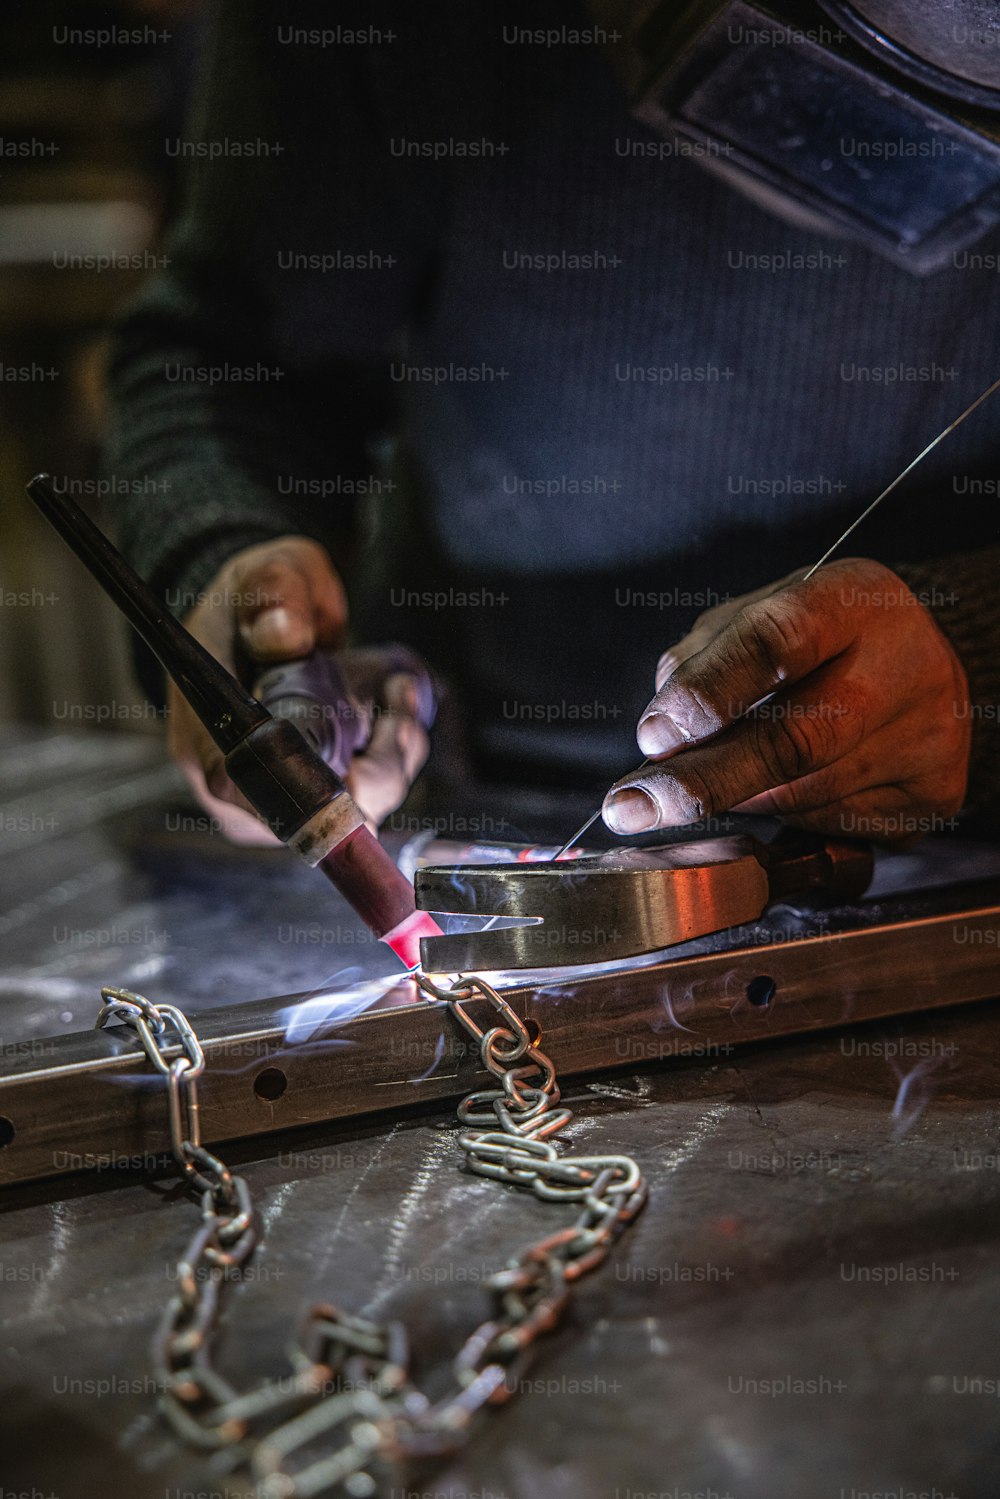 a person working on a piece of metal